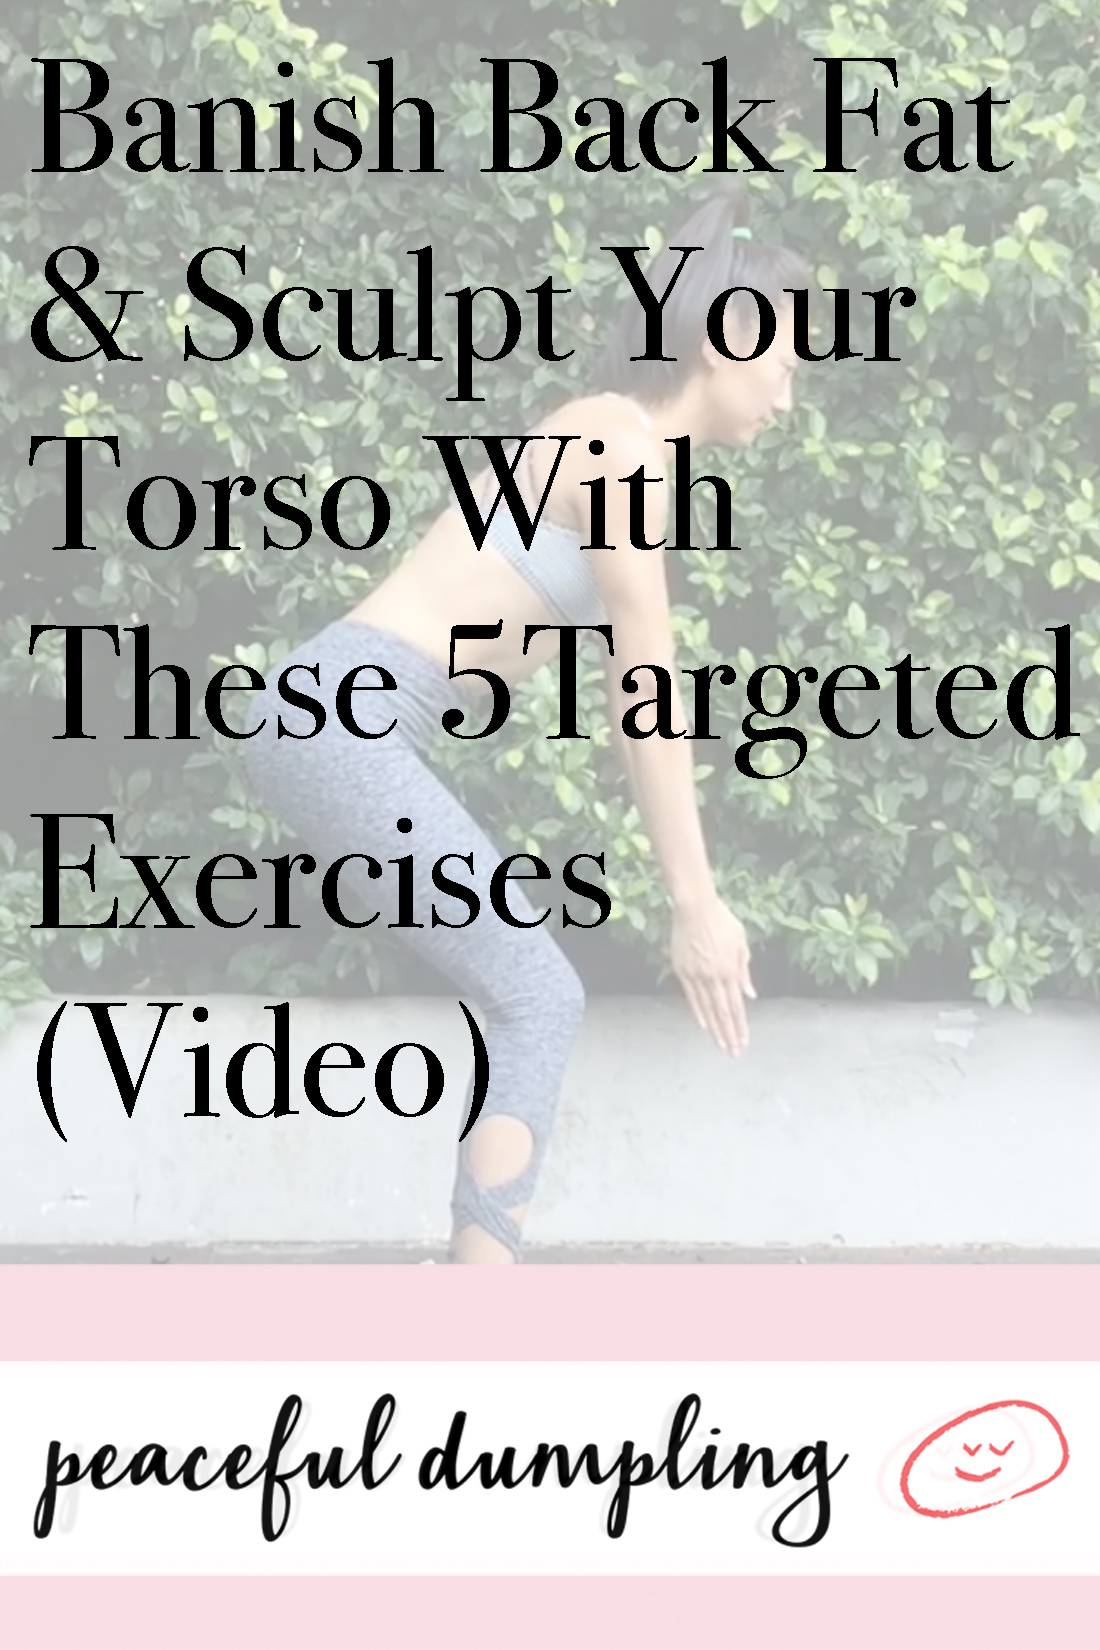 Banish Back Fat & Sculpt Your Torso With These 5 Targeted Exercises (Video)